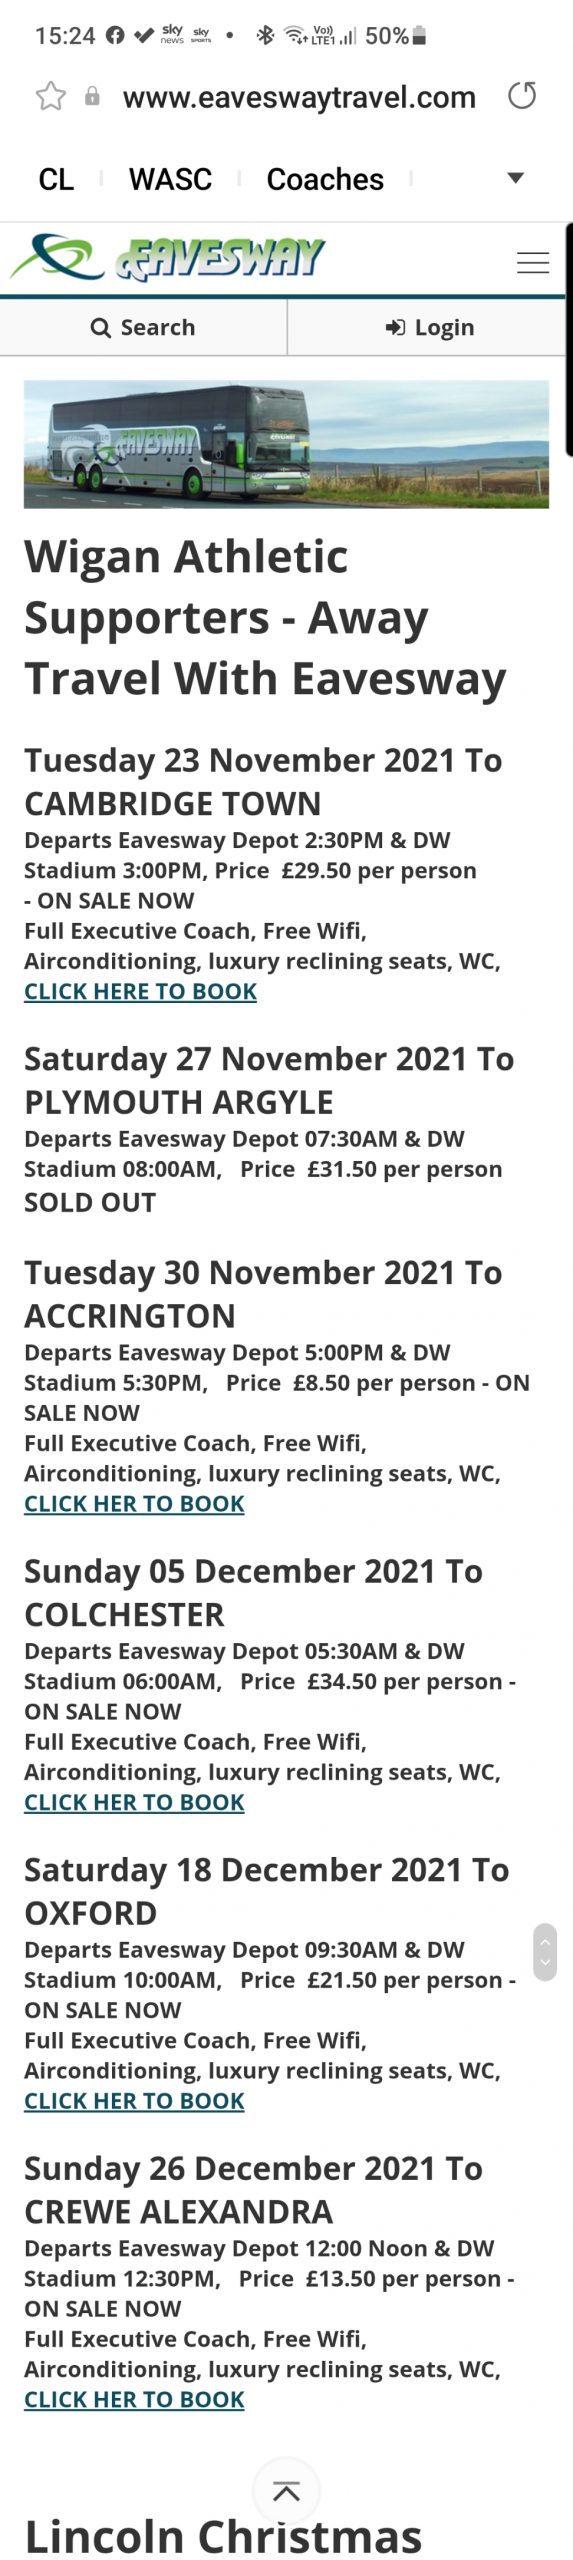 Eavesways travel prices for coaches